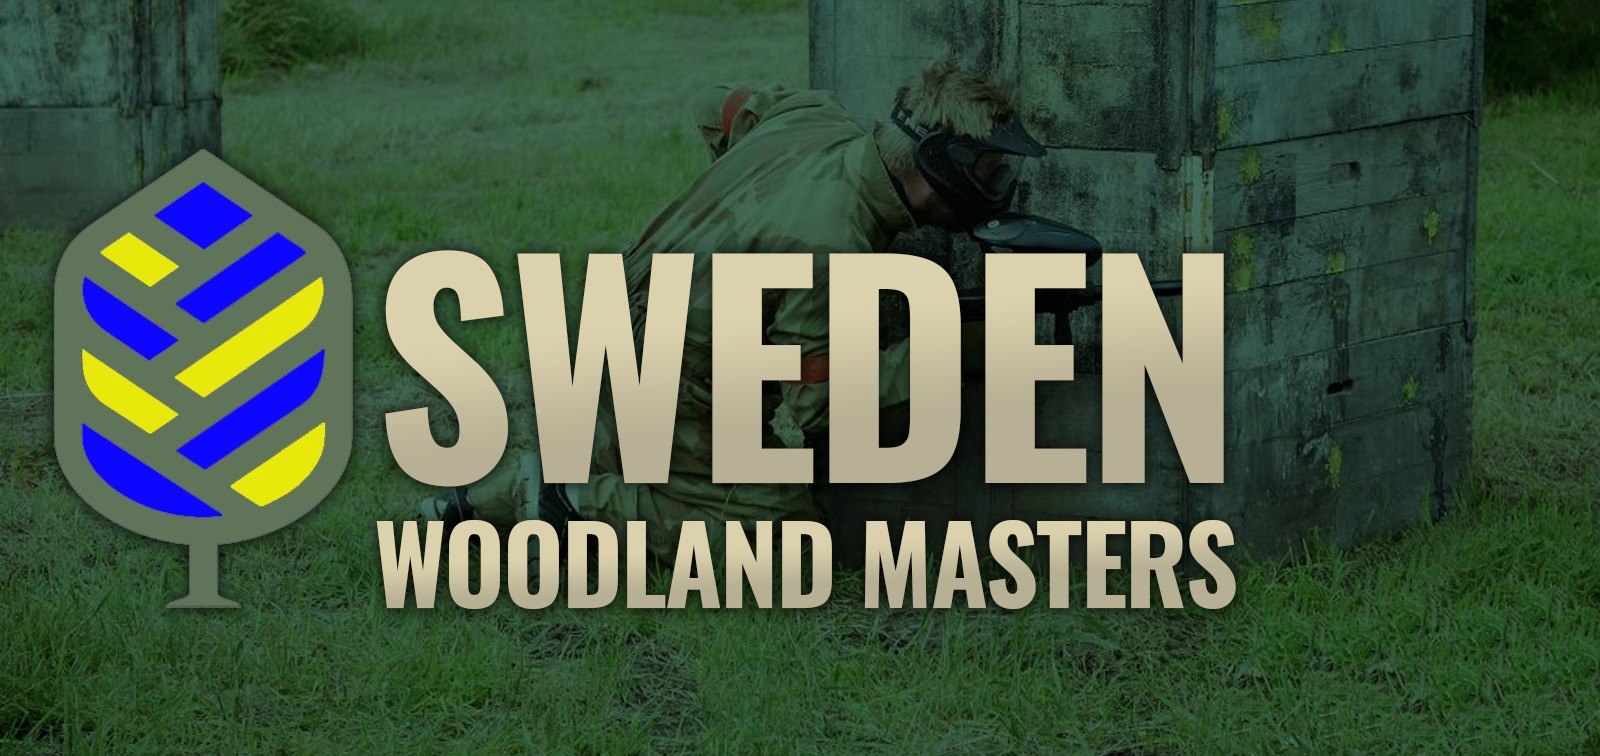 Sweden Woodland Masters - ACpaintball